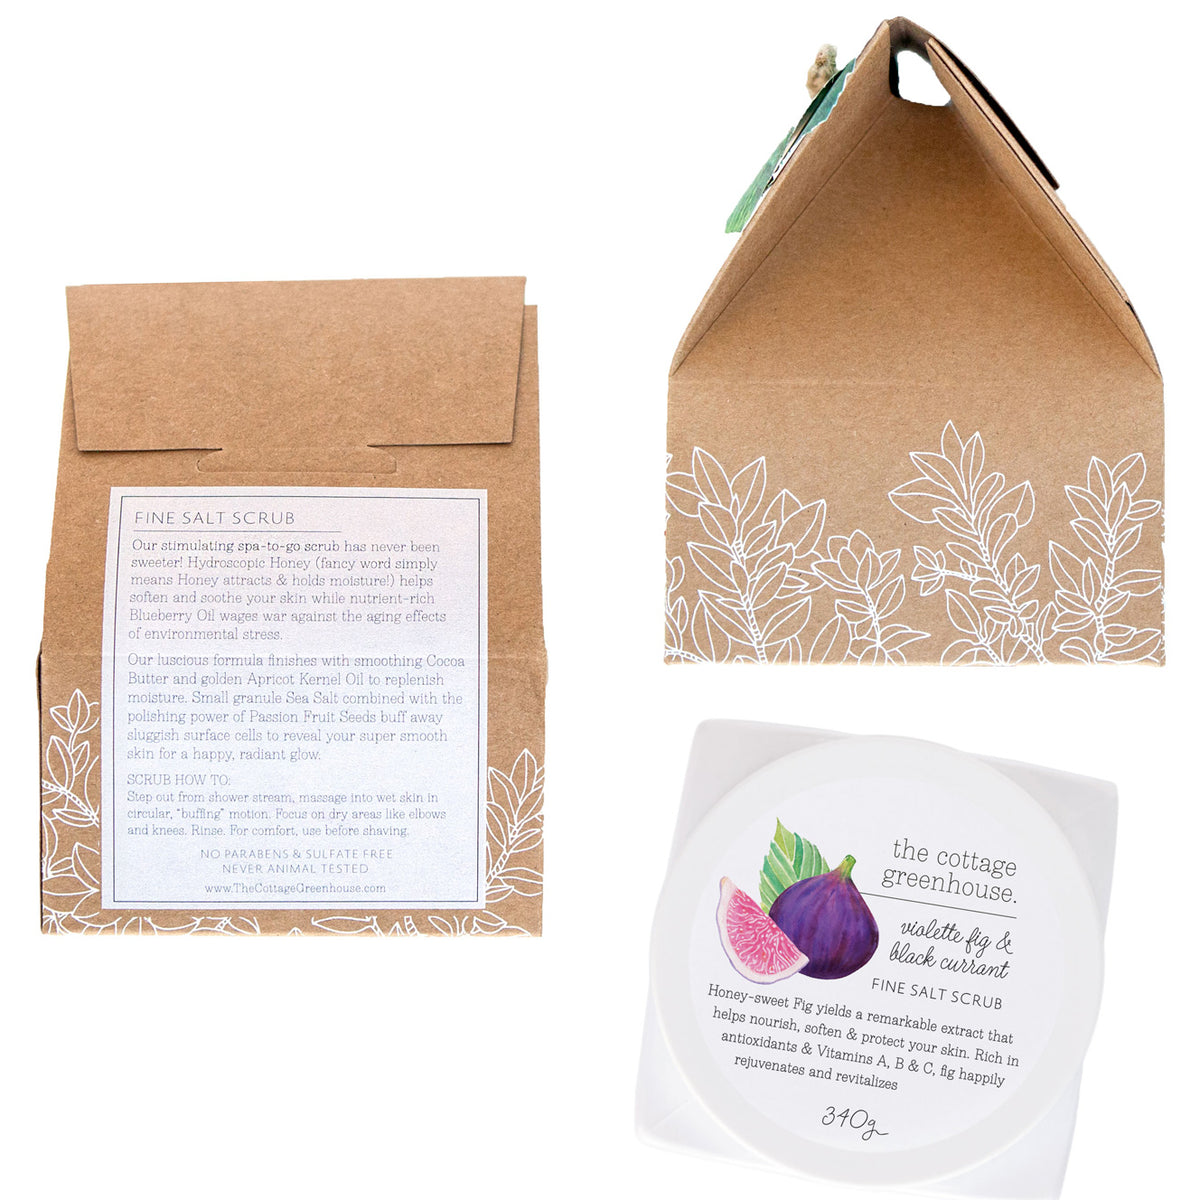 A collage of two images showing packaging for The Cottage Greenhouse Violette Fig & Black Currant Fine Salt Scrub infused with Apricot Kernel Oil. The left image displays a brown paper envelope labeled in elegant typography. The right highlights the product in a triangular from Margot Elena.